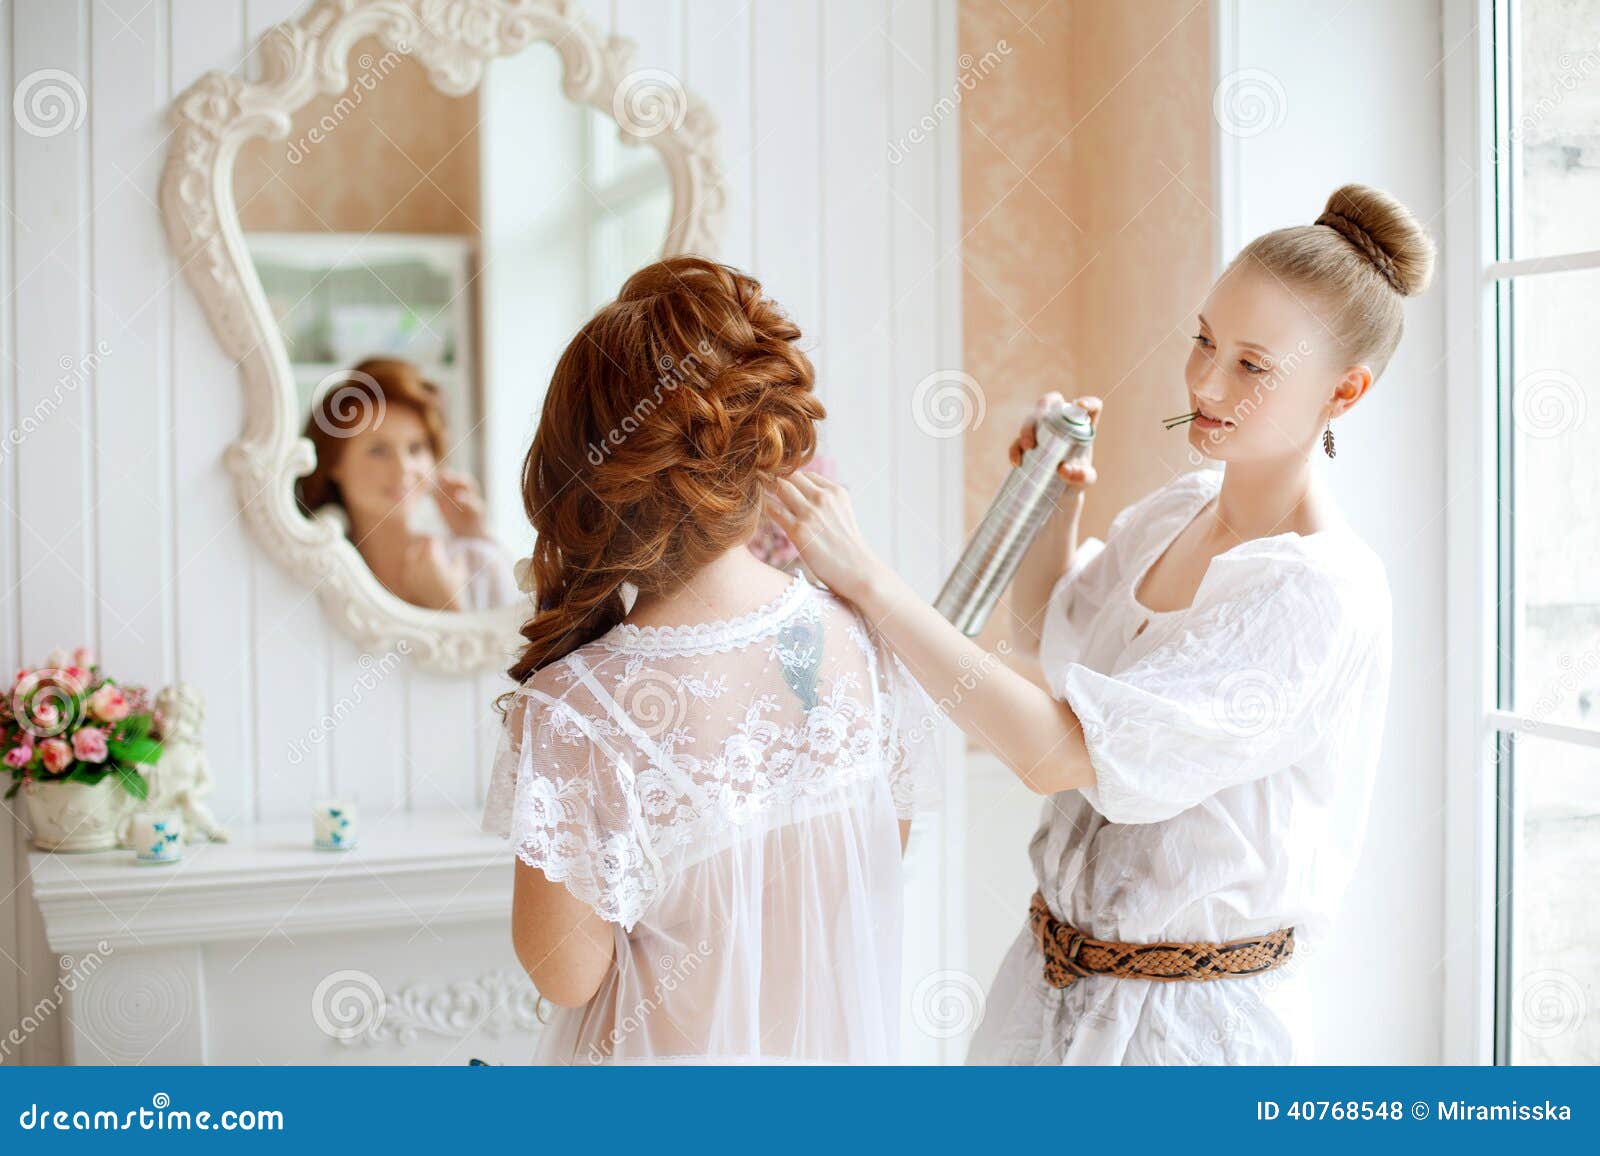 Hair Stylist Makes The Bride On The Wedding Day Stock Photo